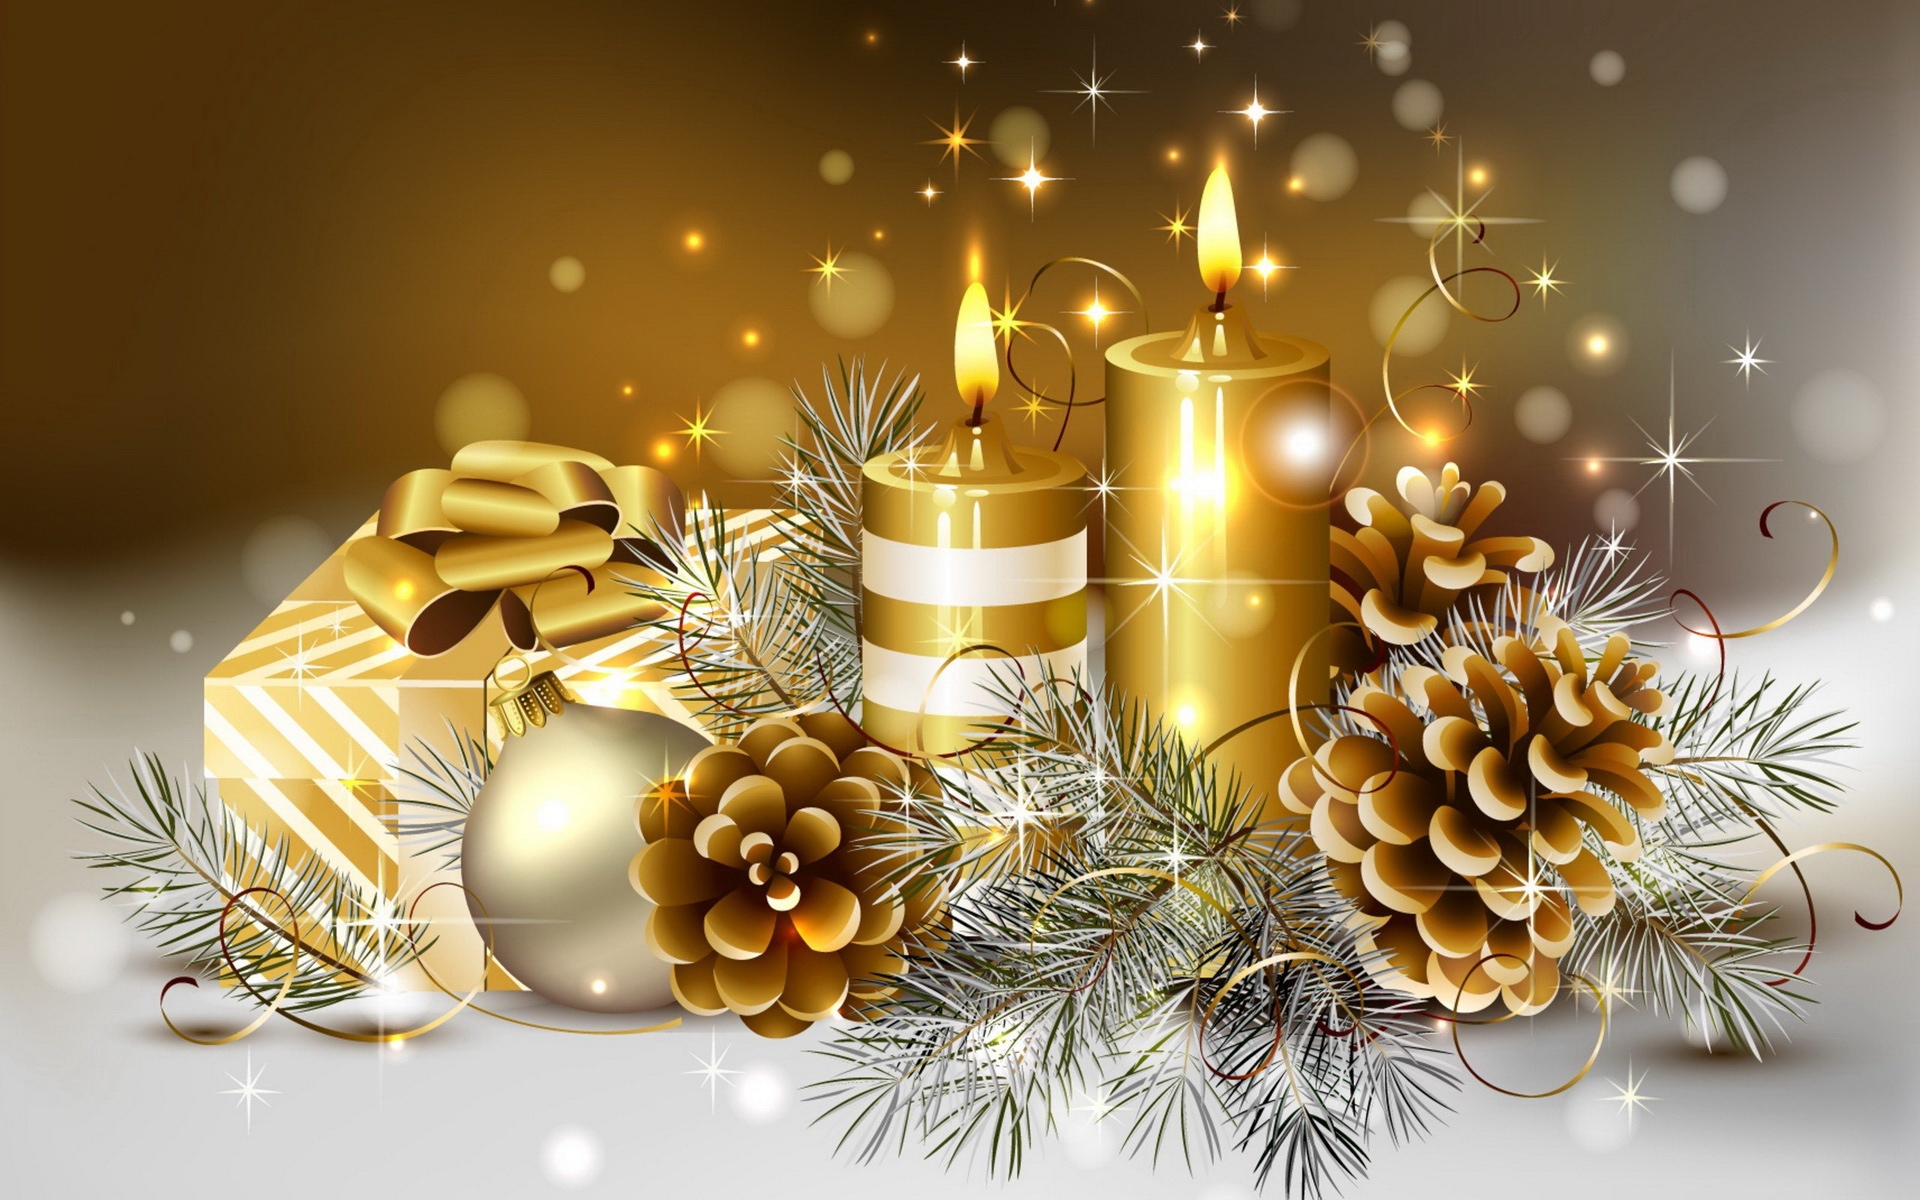 Free Christmas Wallpaper Backgrounds Wallpapers9